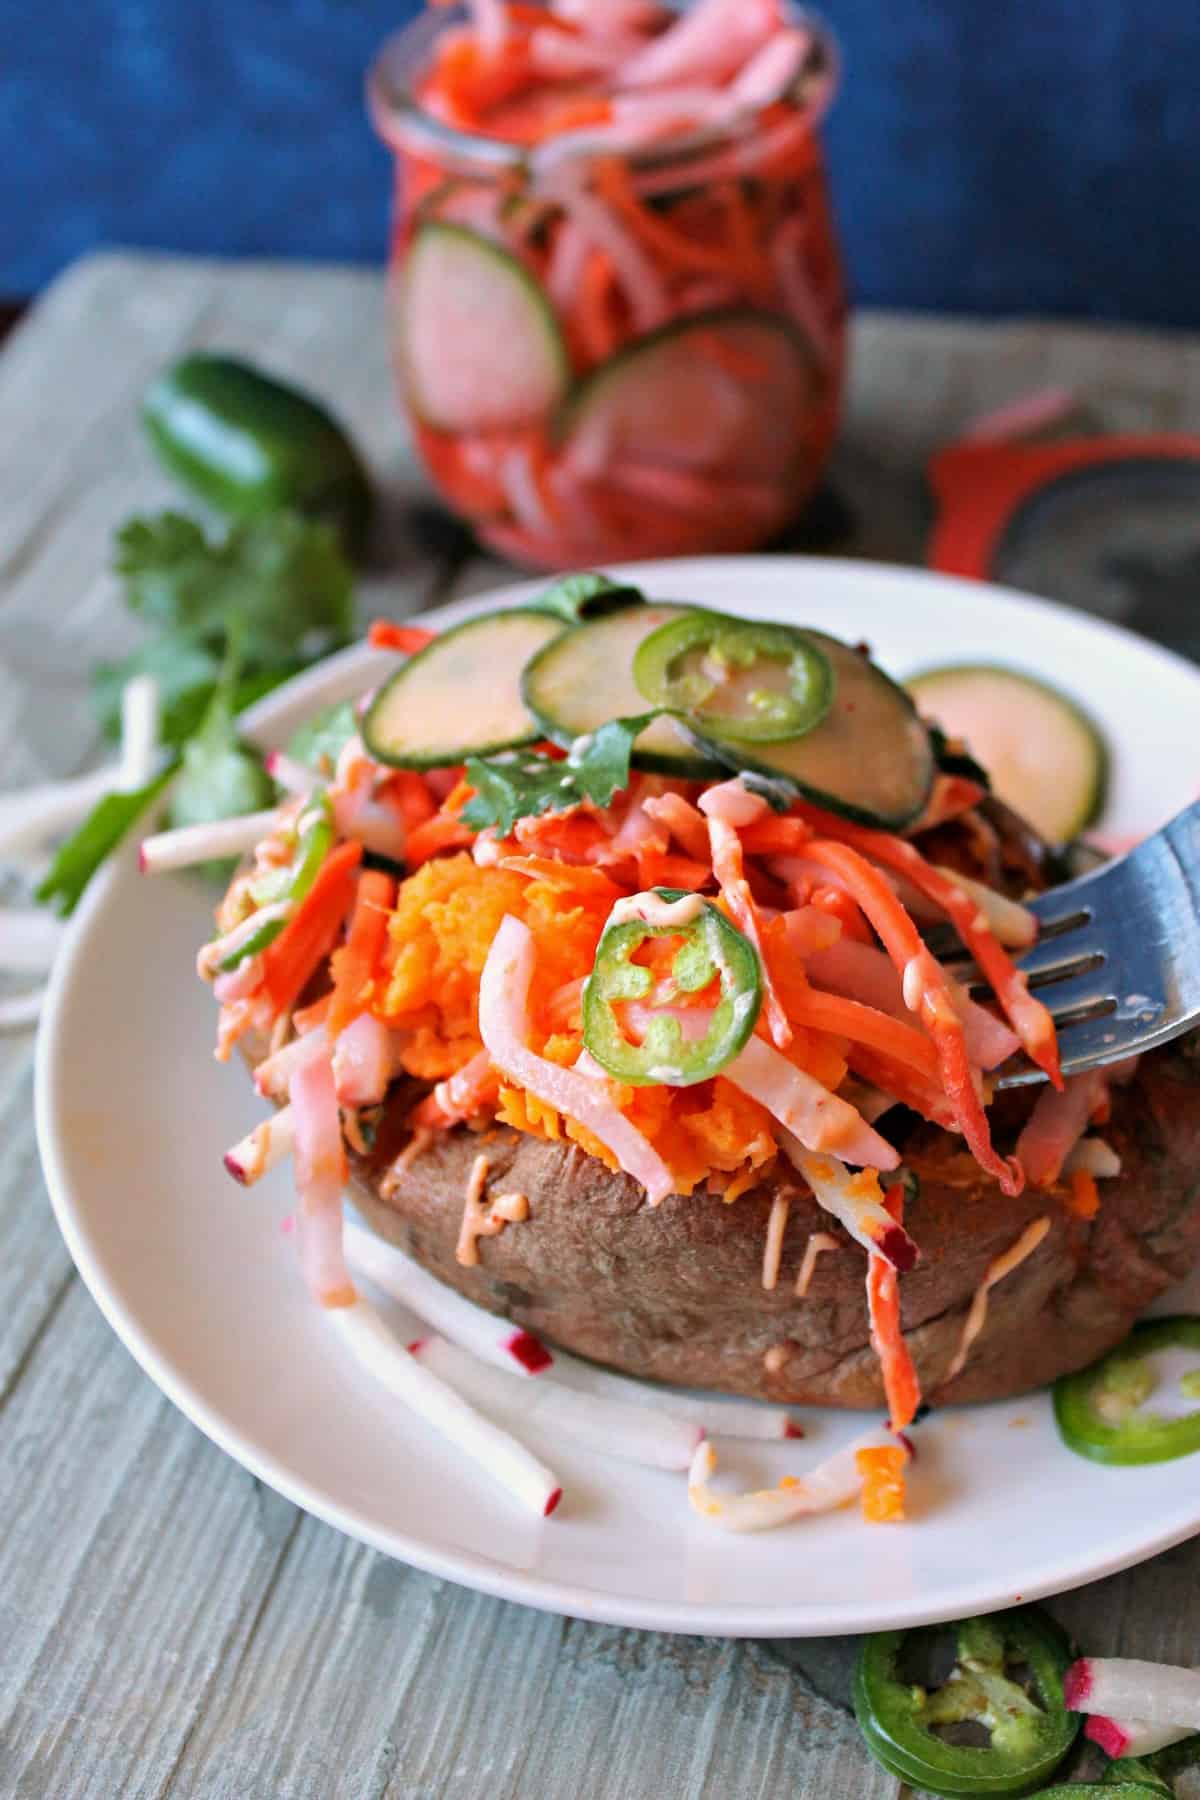 Banh Mi Loaded Sweet Potatoes make a nutritious meal that's anything but ordinary. Boasting some of the flavors of a classic Vietnamese Banh Mi Sandwich, this loaded spud covers all the bases: Sweet, salty, spicy, creamy and crunchy!